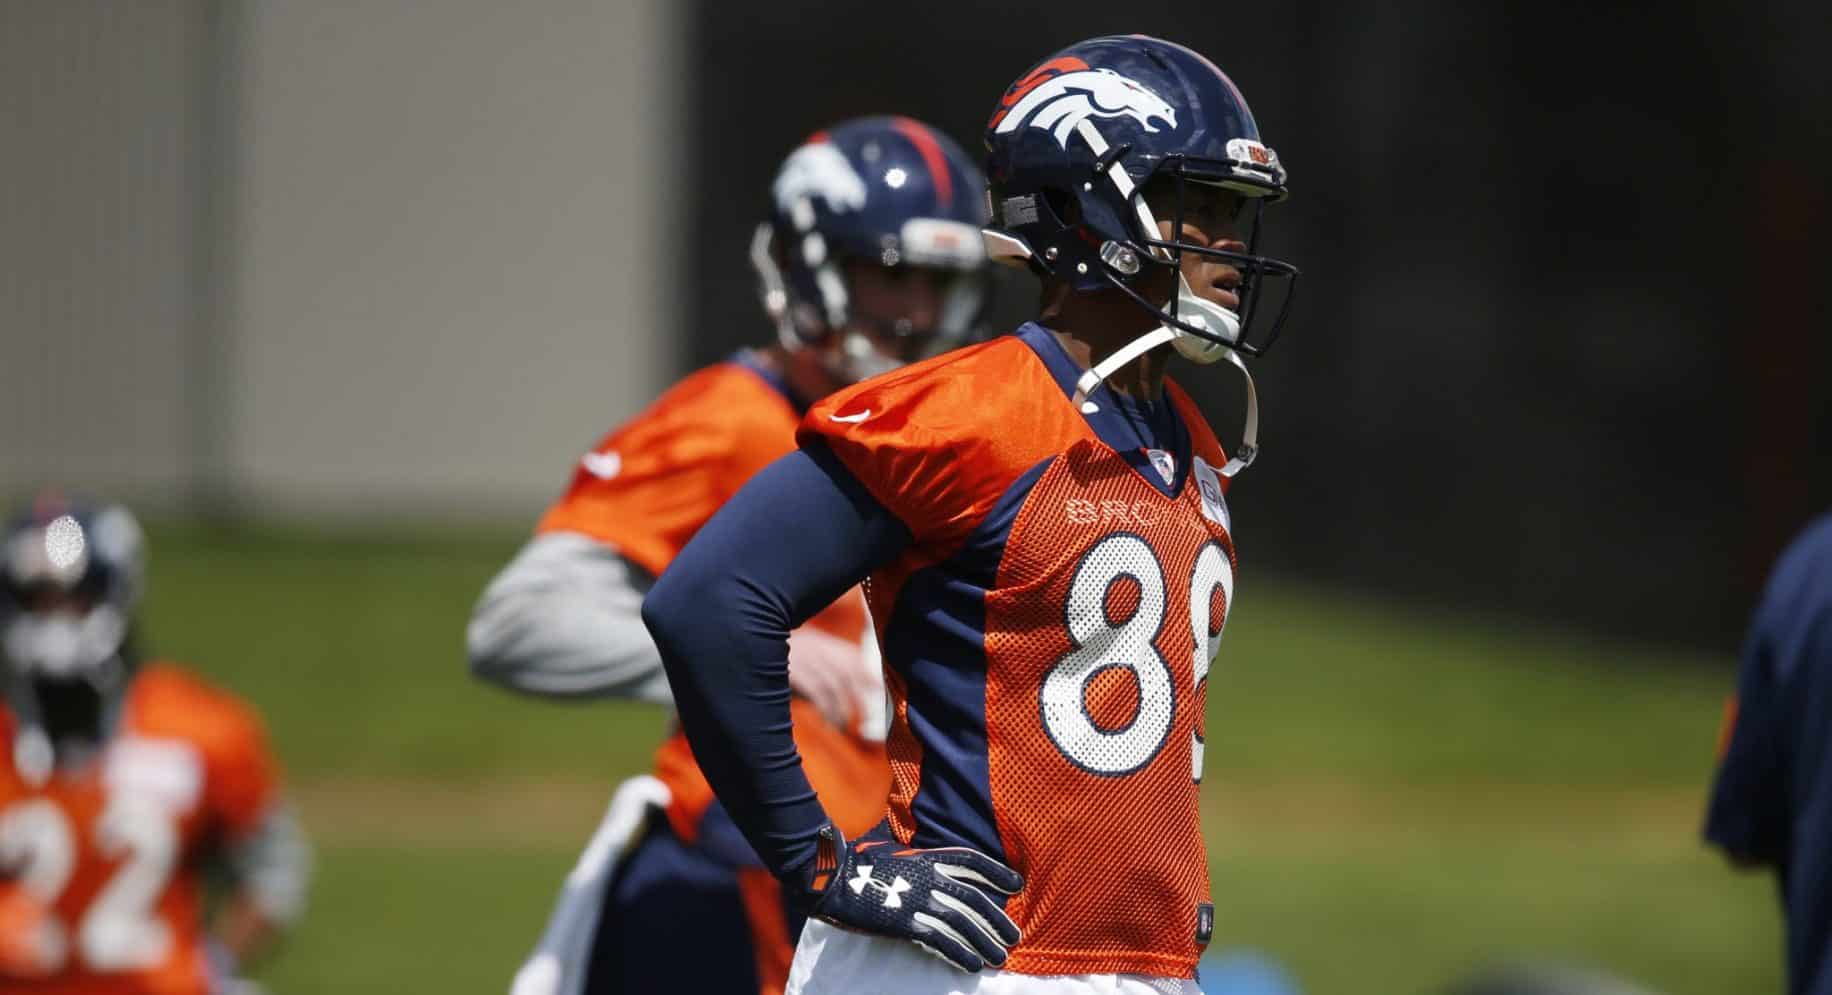 Broncos WR Demaryius Thomas is listed as questionable with a hip injury